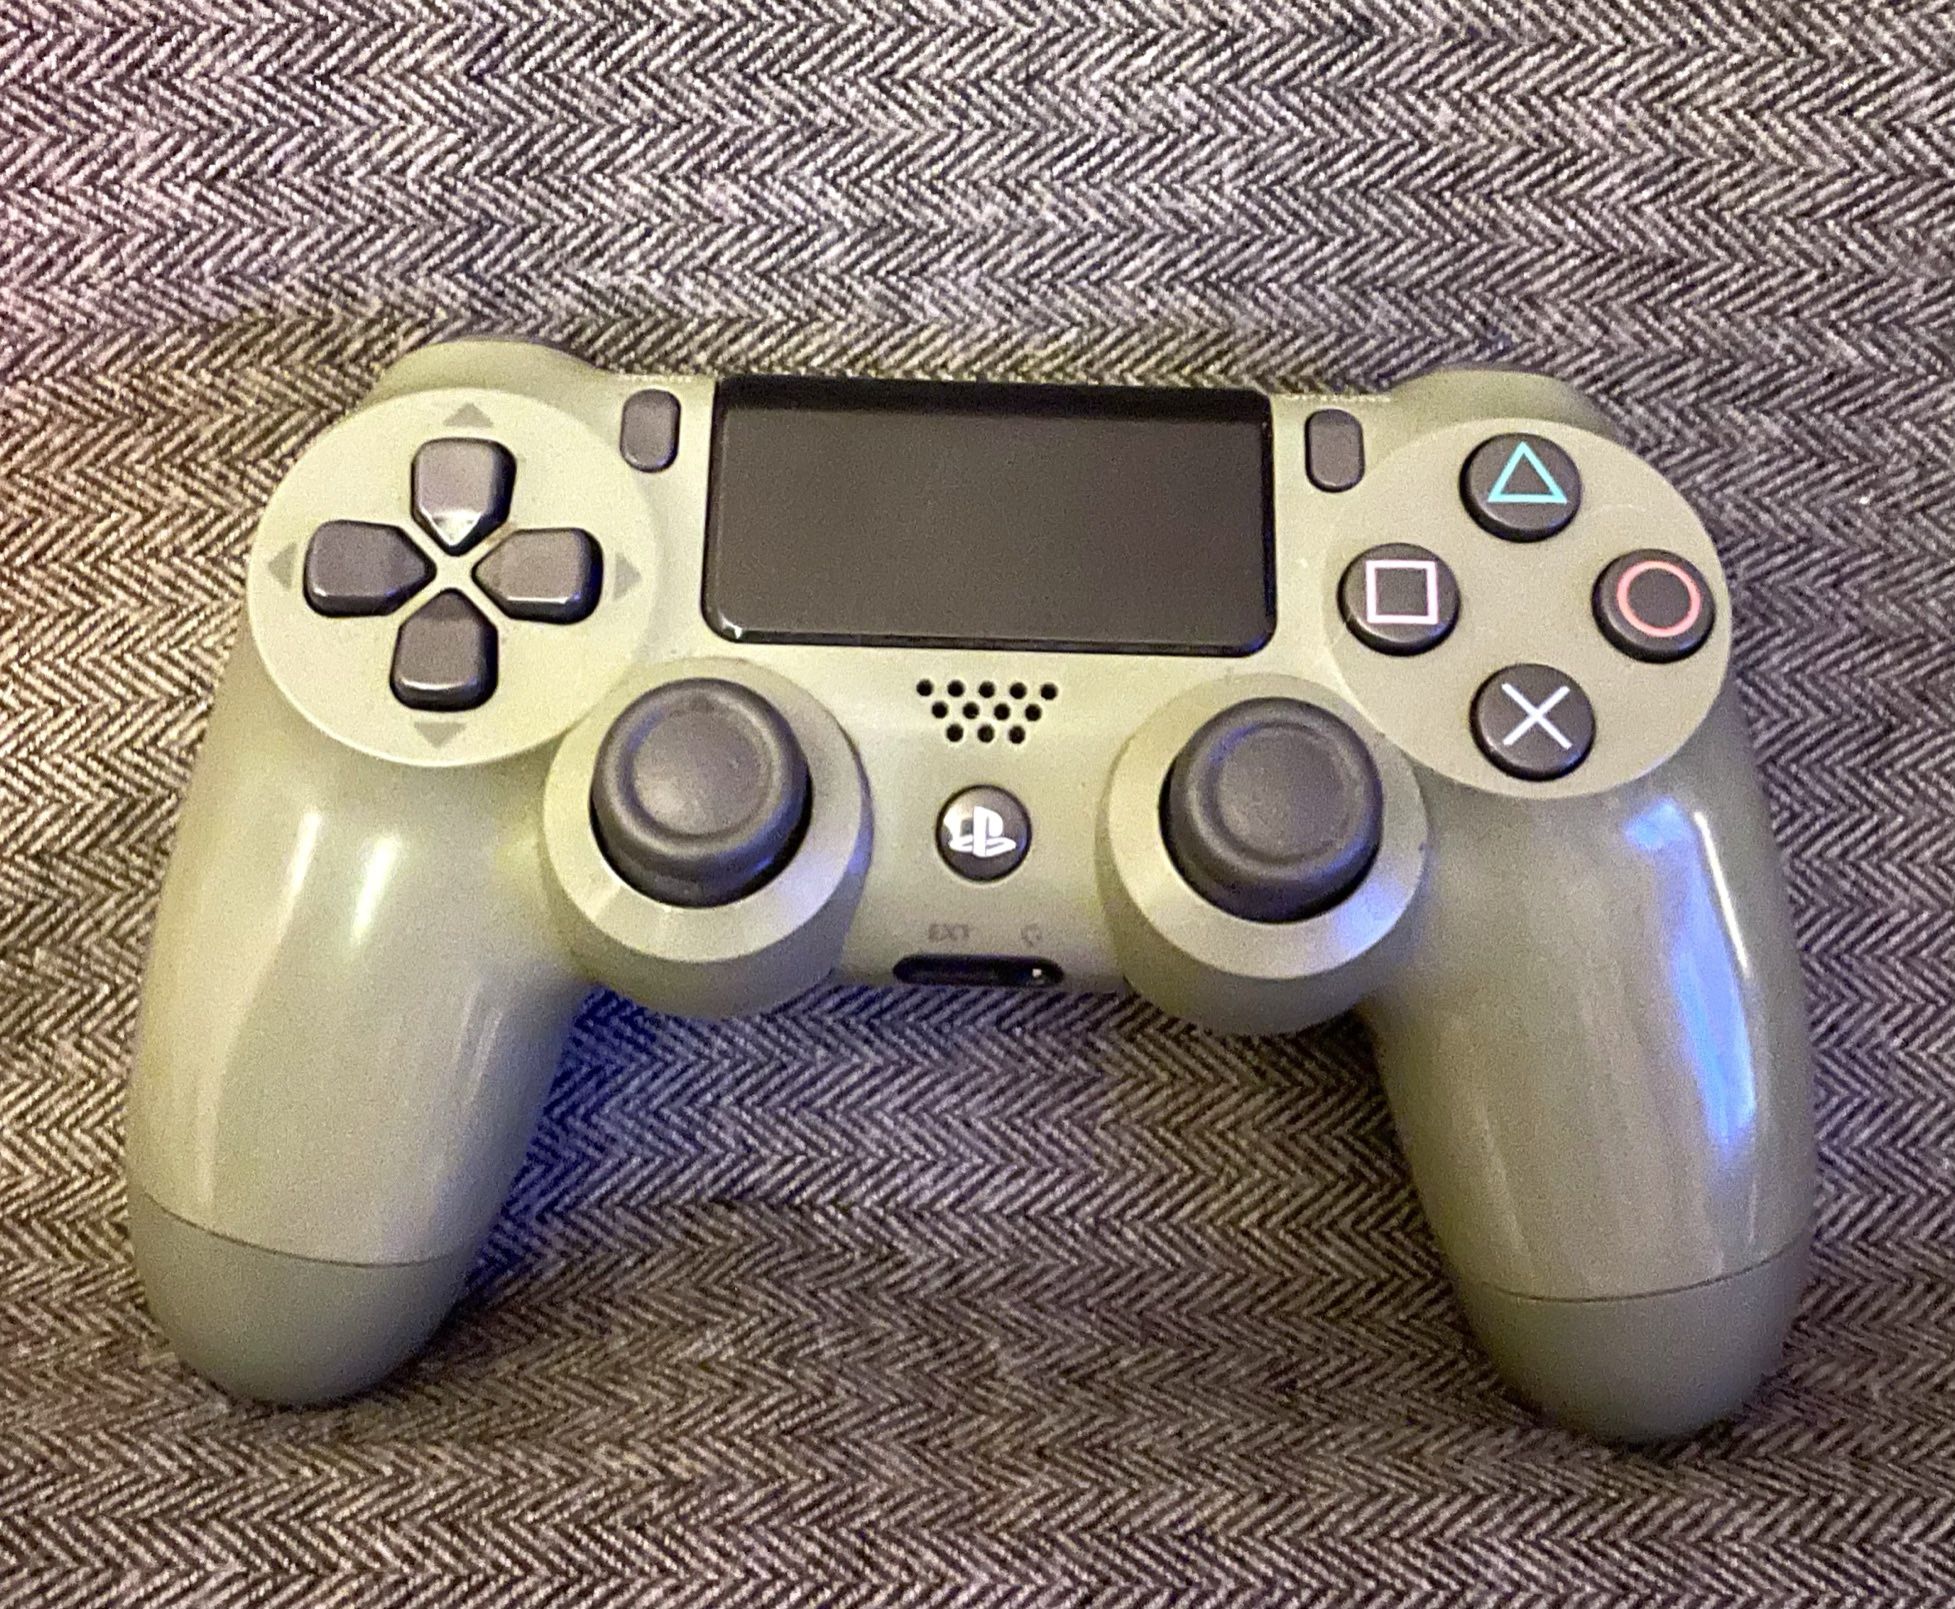 Playstation 4 Controller